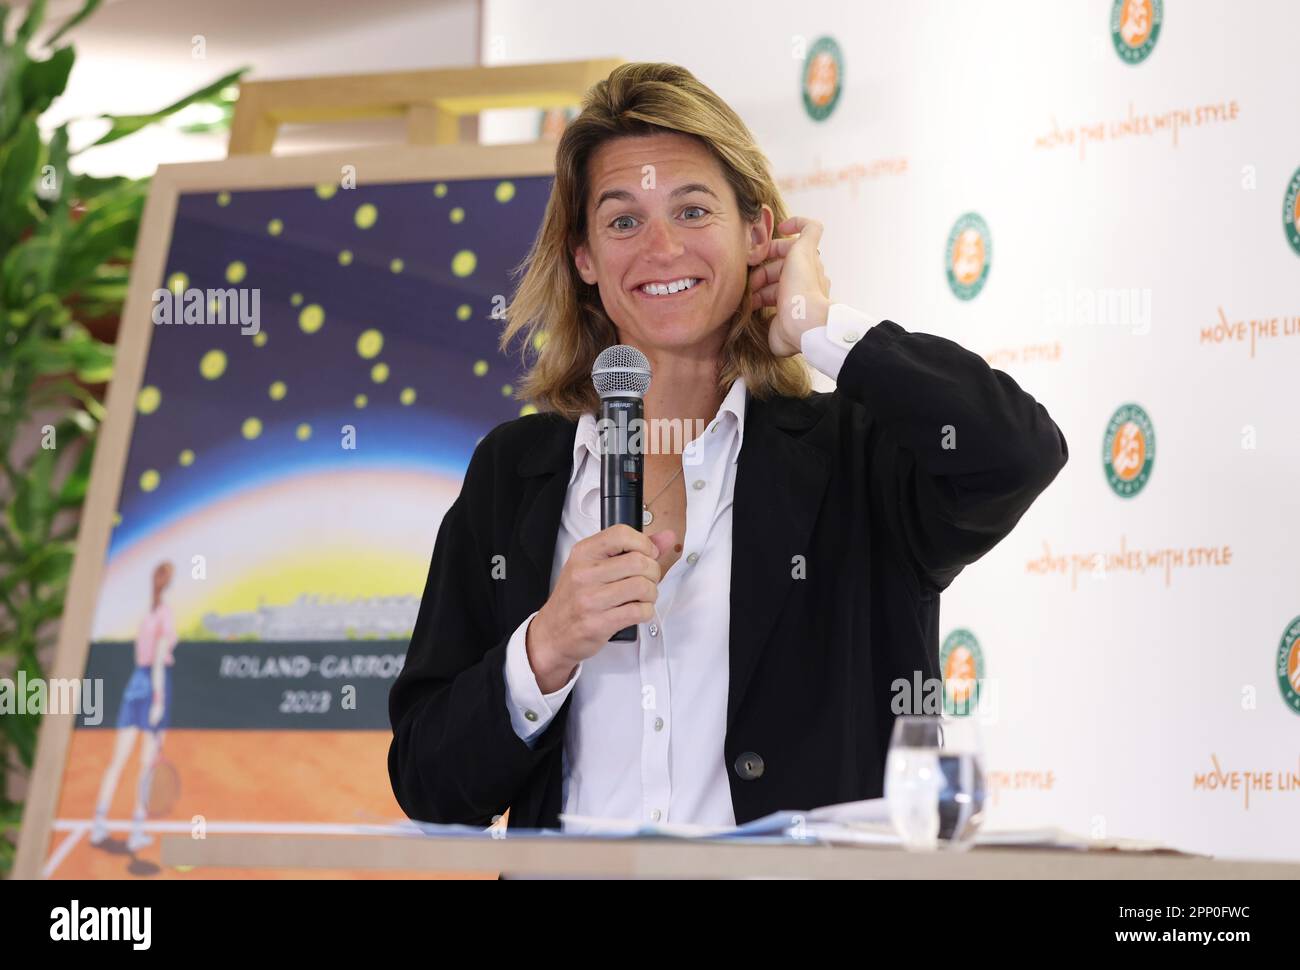 Paris, France. 21st Apr, 2023. Roland-Garros Open tennis tournament's director Amelie Mauresmo addresses a press conference presenting the 2023 edition of the Roland Garros Grand Slam tennis tournament at the Roland Garros stadium, western Paris, France, April 21, 2023. Credit: Gao Jing/Xinhua/Alamy Live News Stock Photo